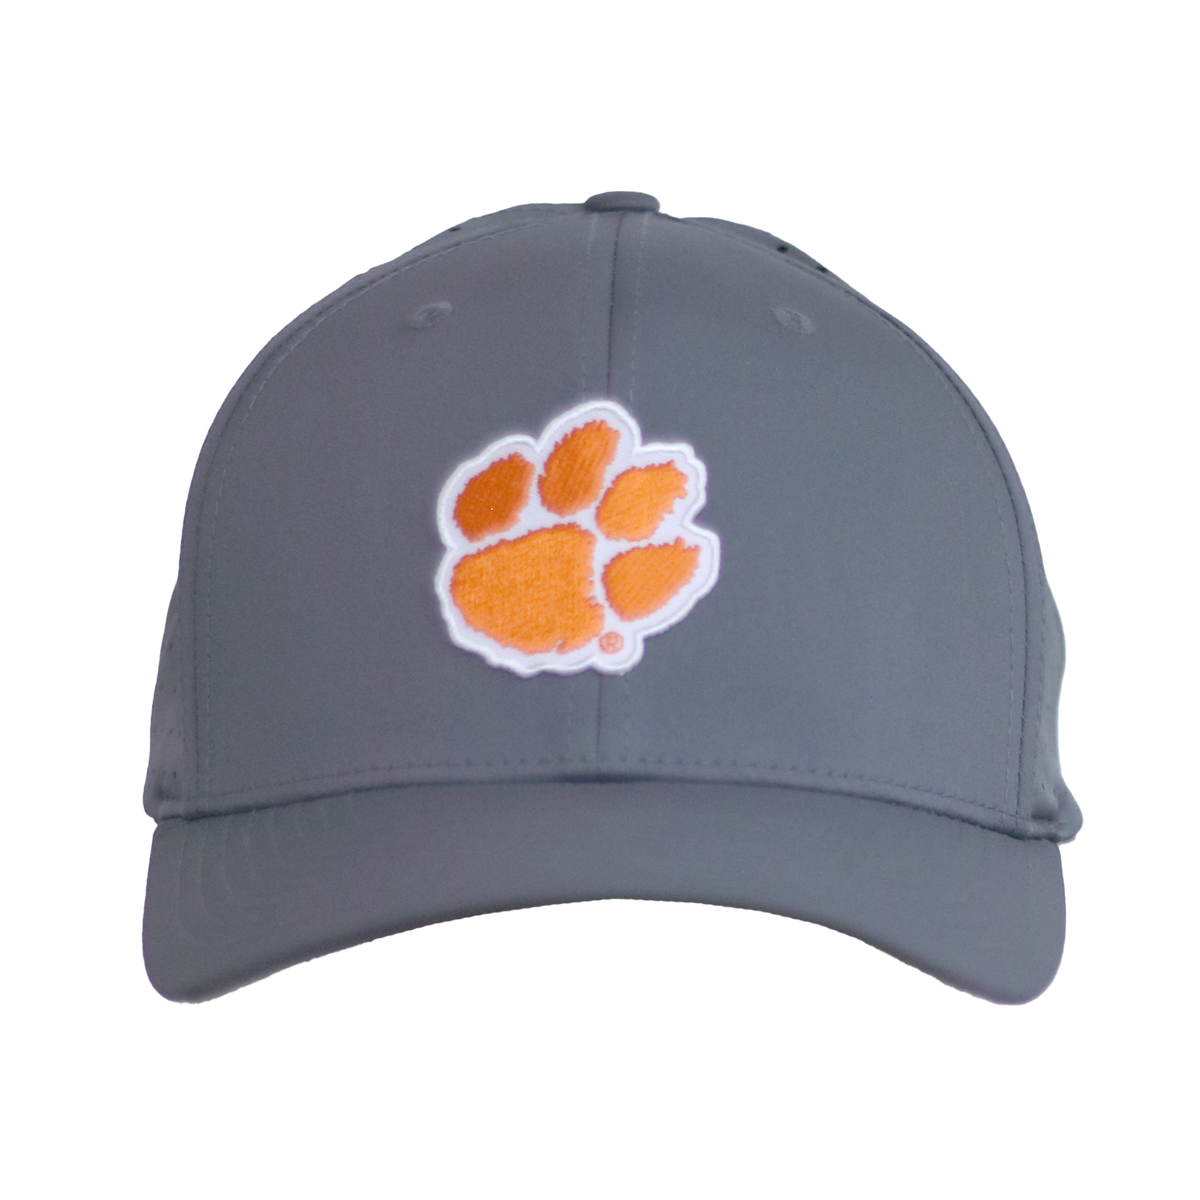 Clemson Orange and White Tiger Paw R632 - Charcoal